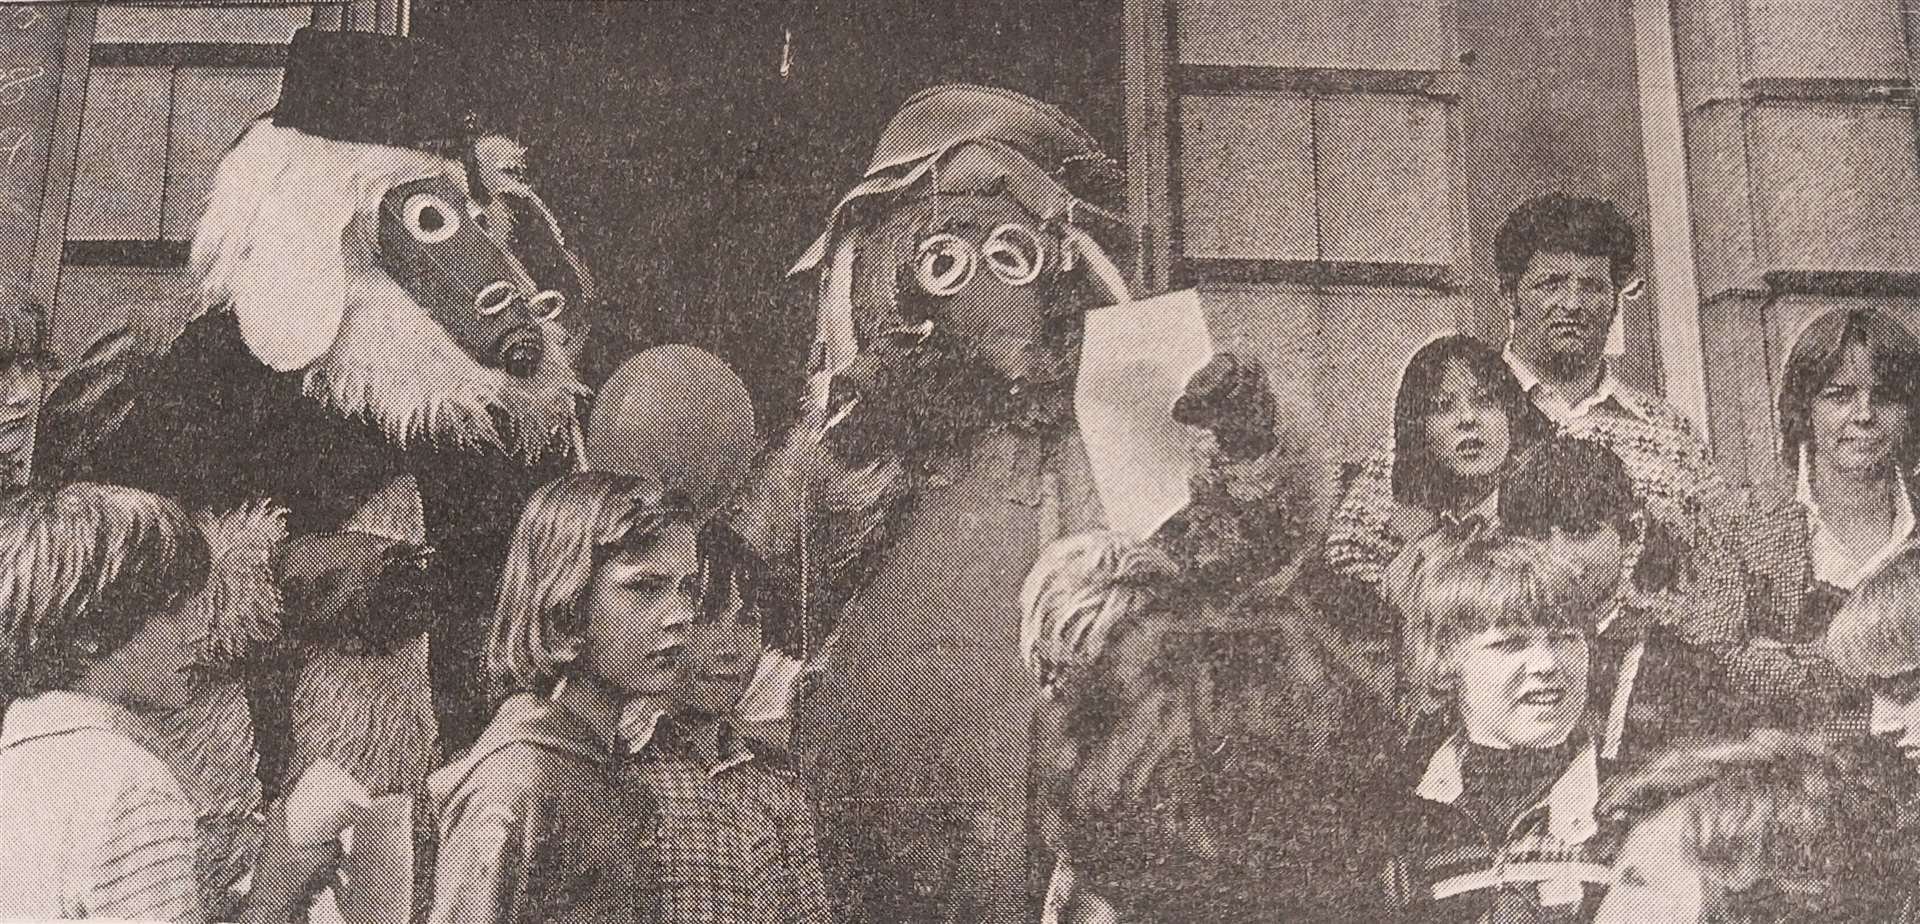 Uncle Bulgaria and Cousin Botany announce the winners at Garioch Arcade. (Inverurie Advertiser 1979)